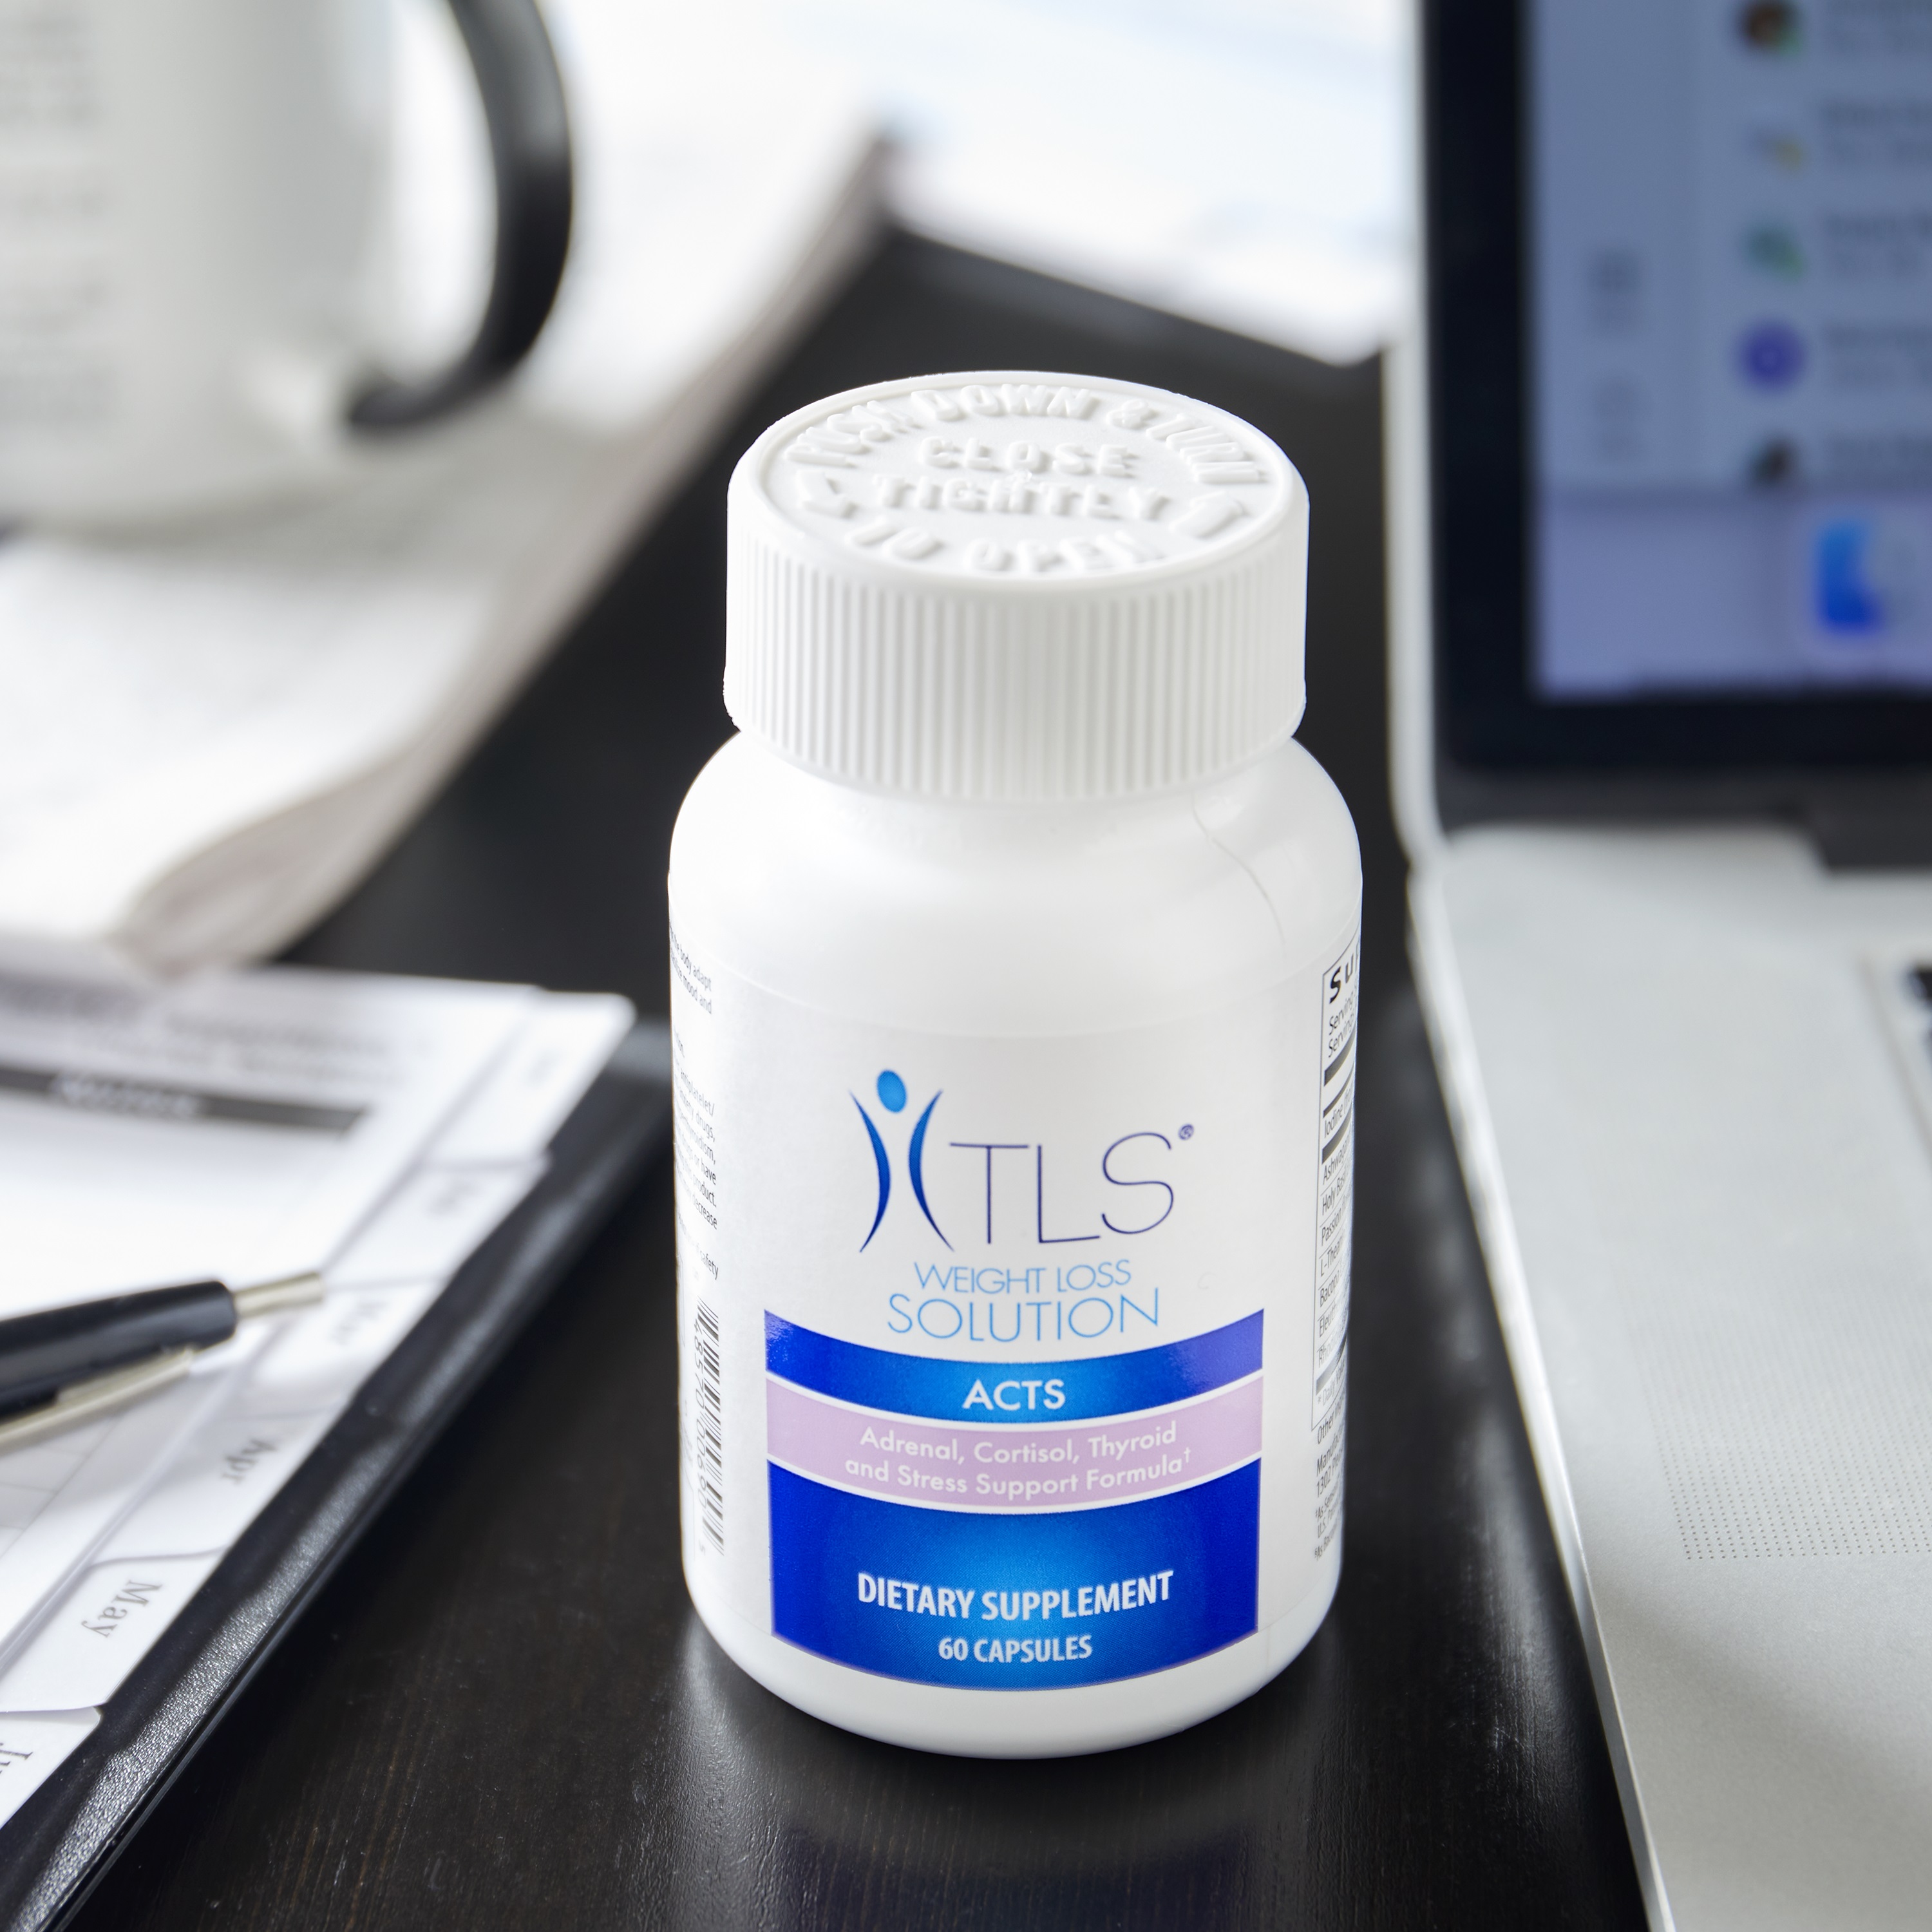 Primary Benefits* of TLS® ACTS Adrenal, Cortisol, Thyroid & Stress Support Formula